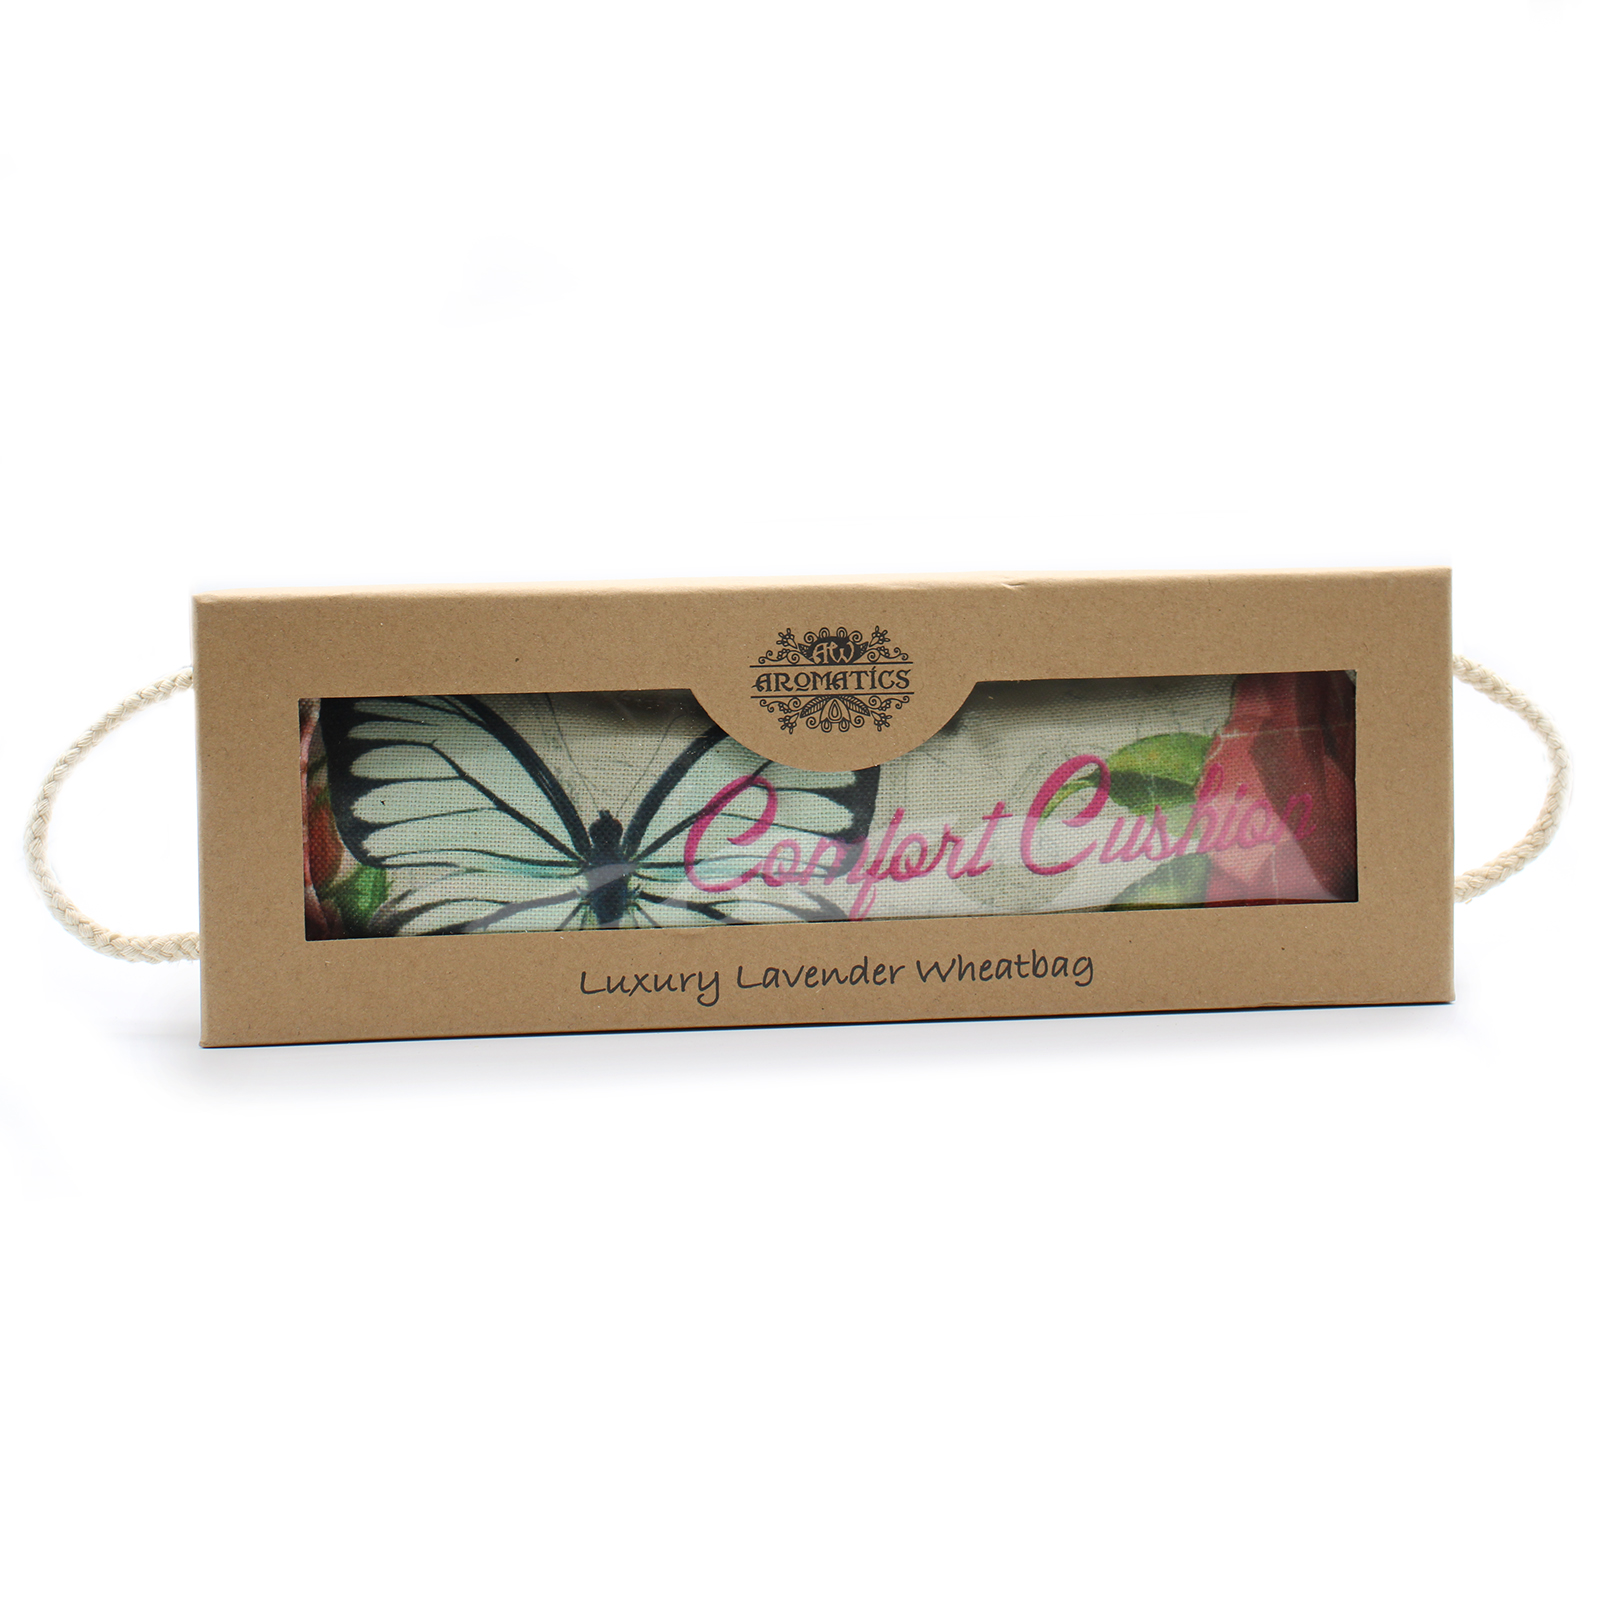 Luxury Lavender Wheat Bag - Butterflies & Roses - Click Image to Close